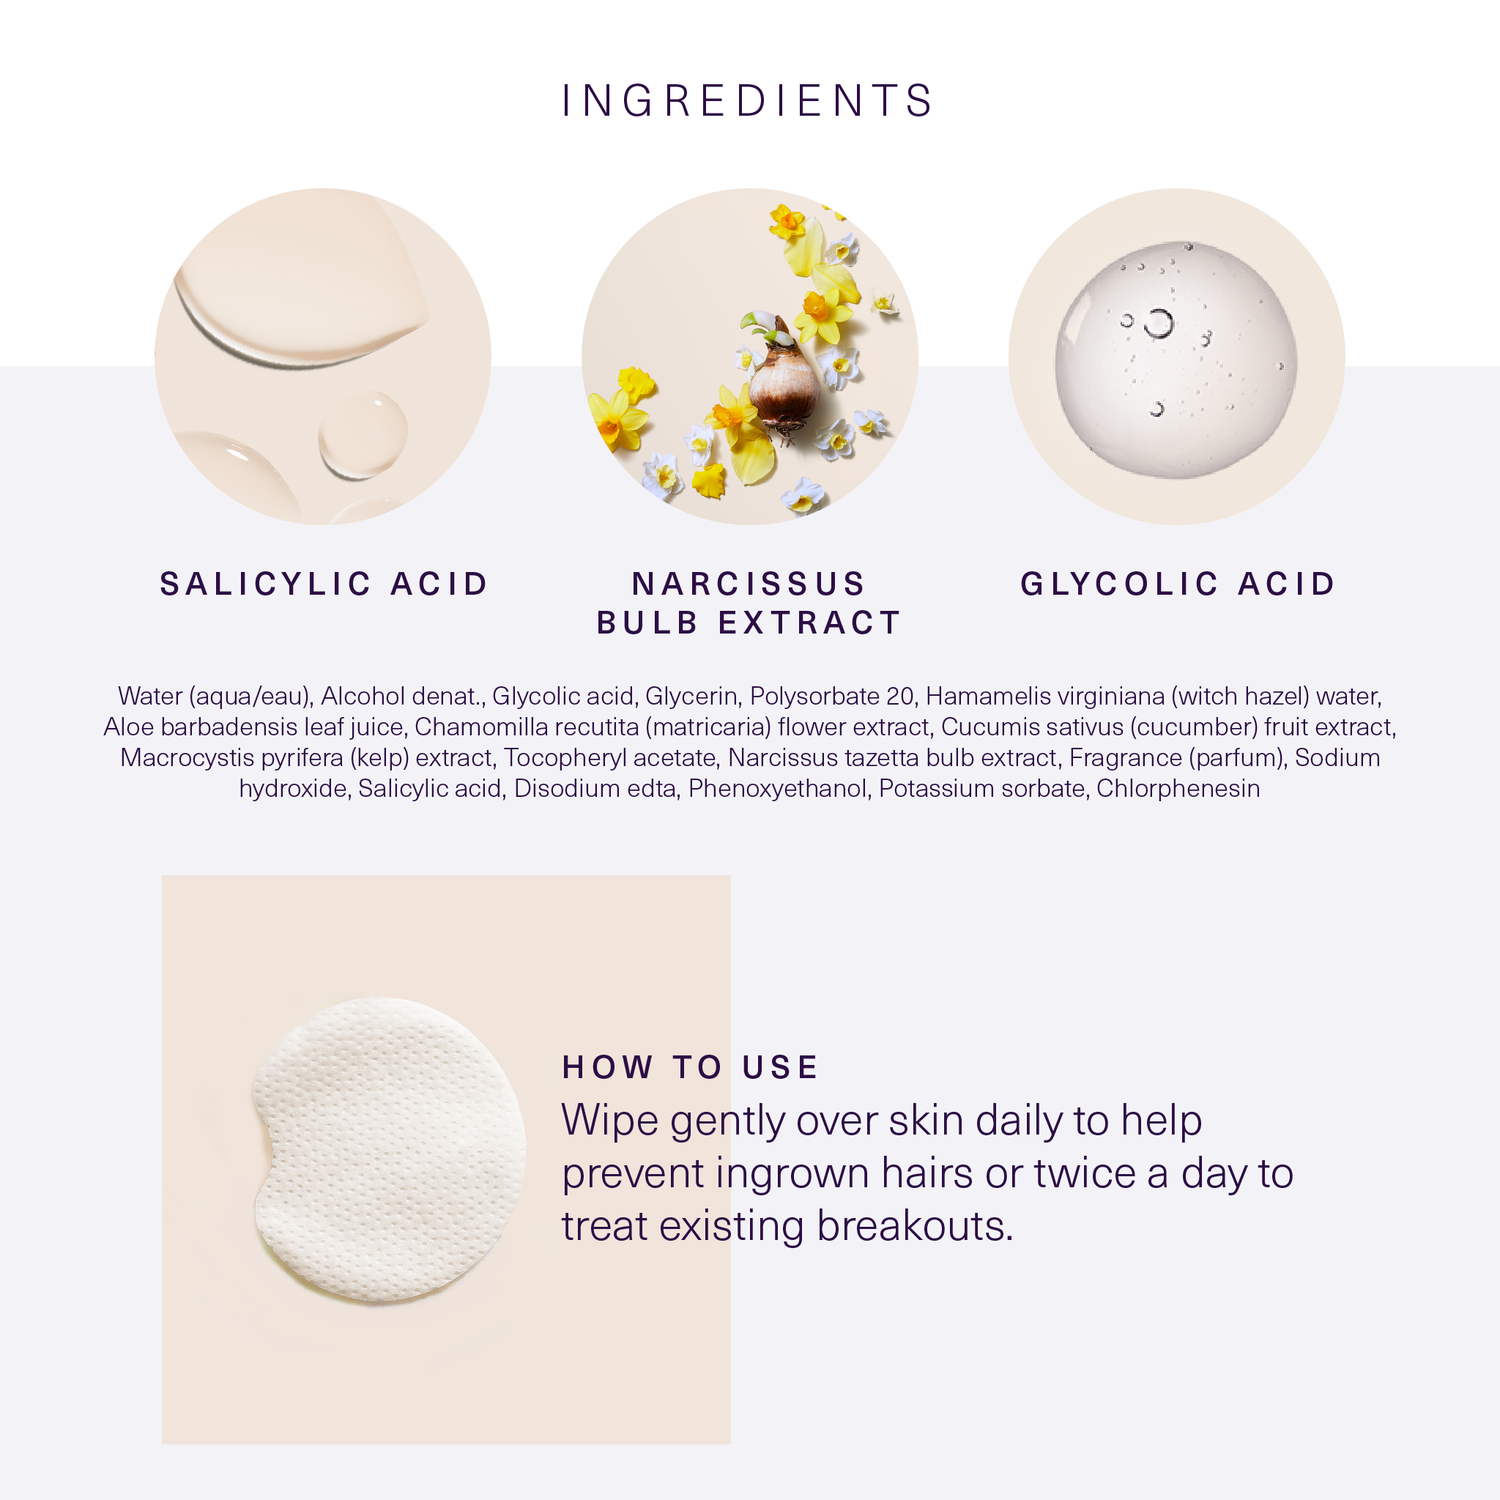 Ingredients and how to use European Wax Center Ingrown Hair Wipes with images of a wipe, salicylic acid, narcissus bulb extract, and glycolic acid in front of a white and light gray background